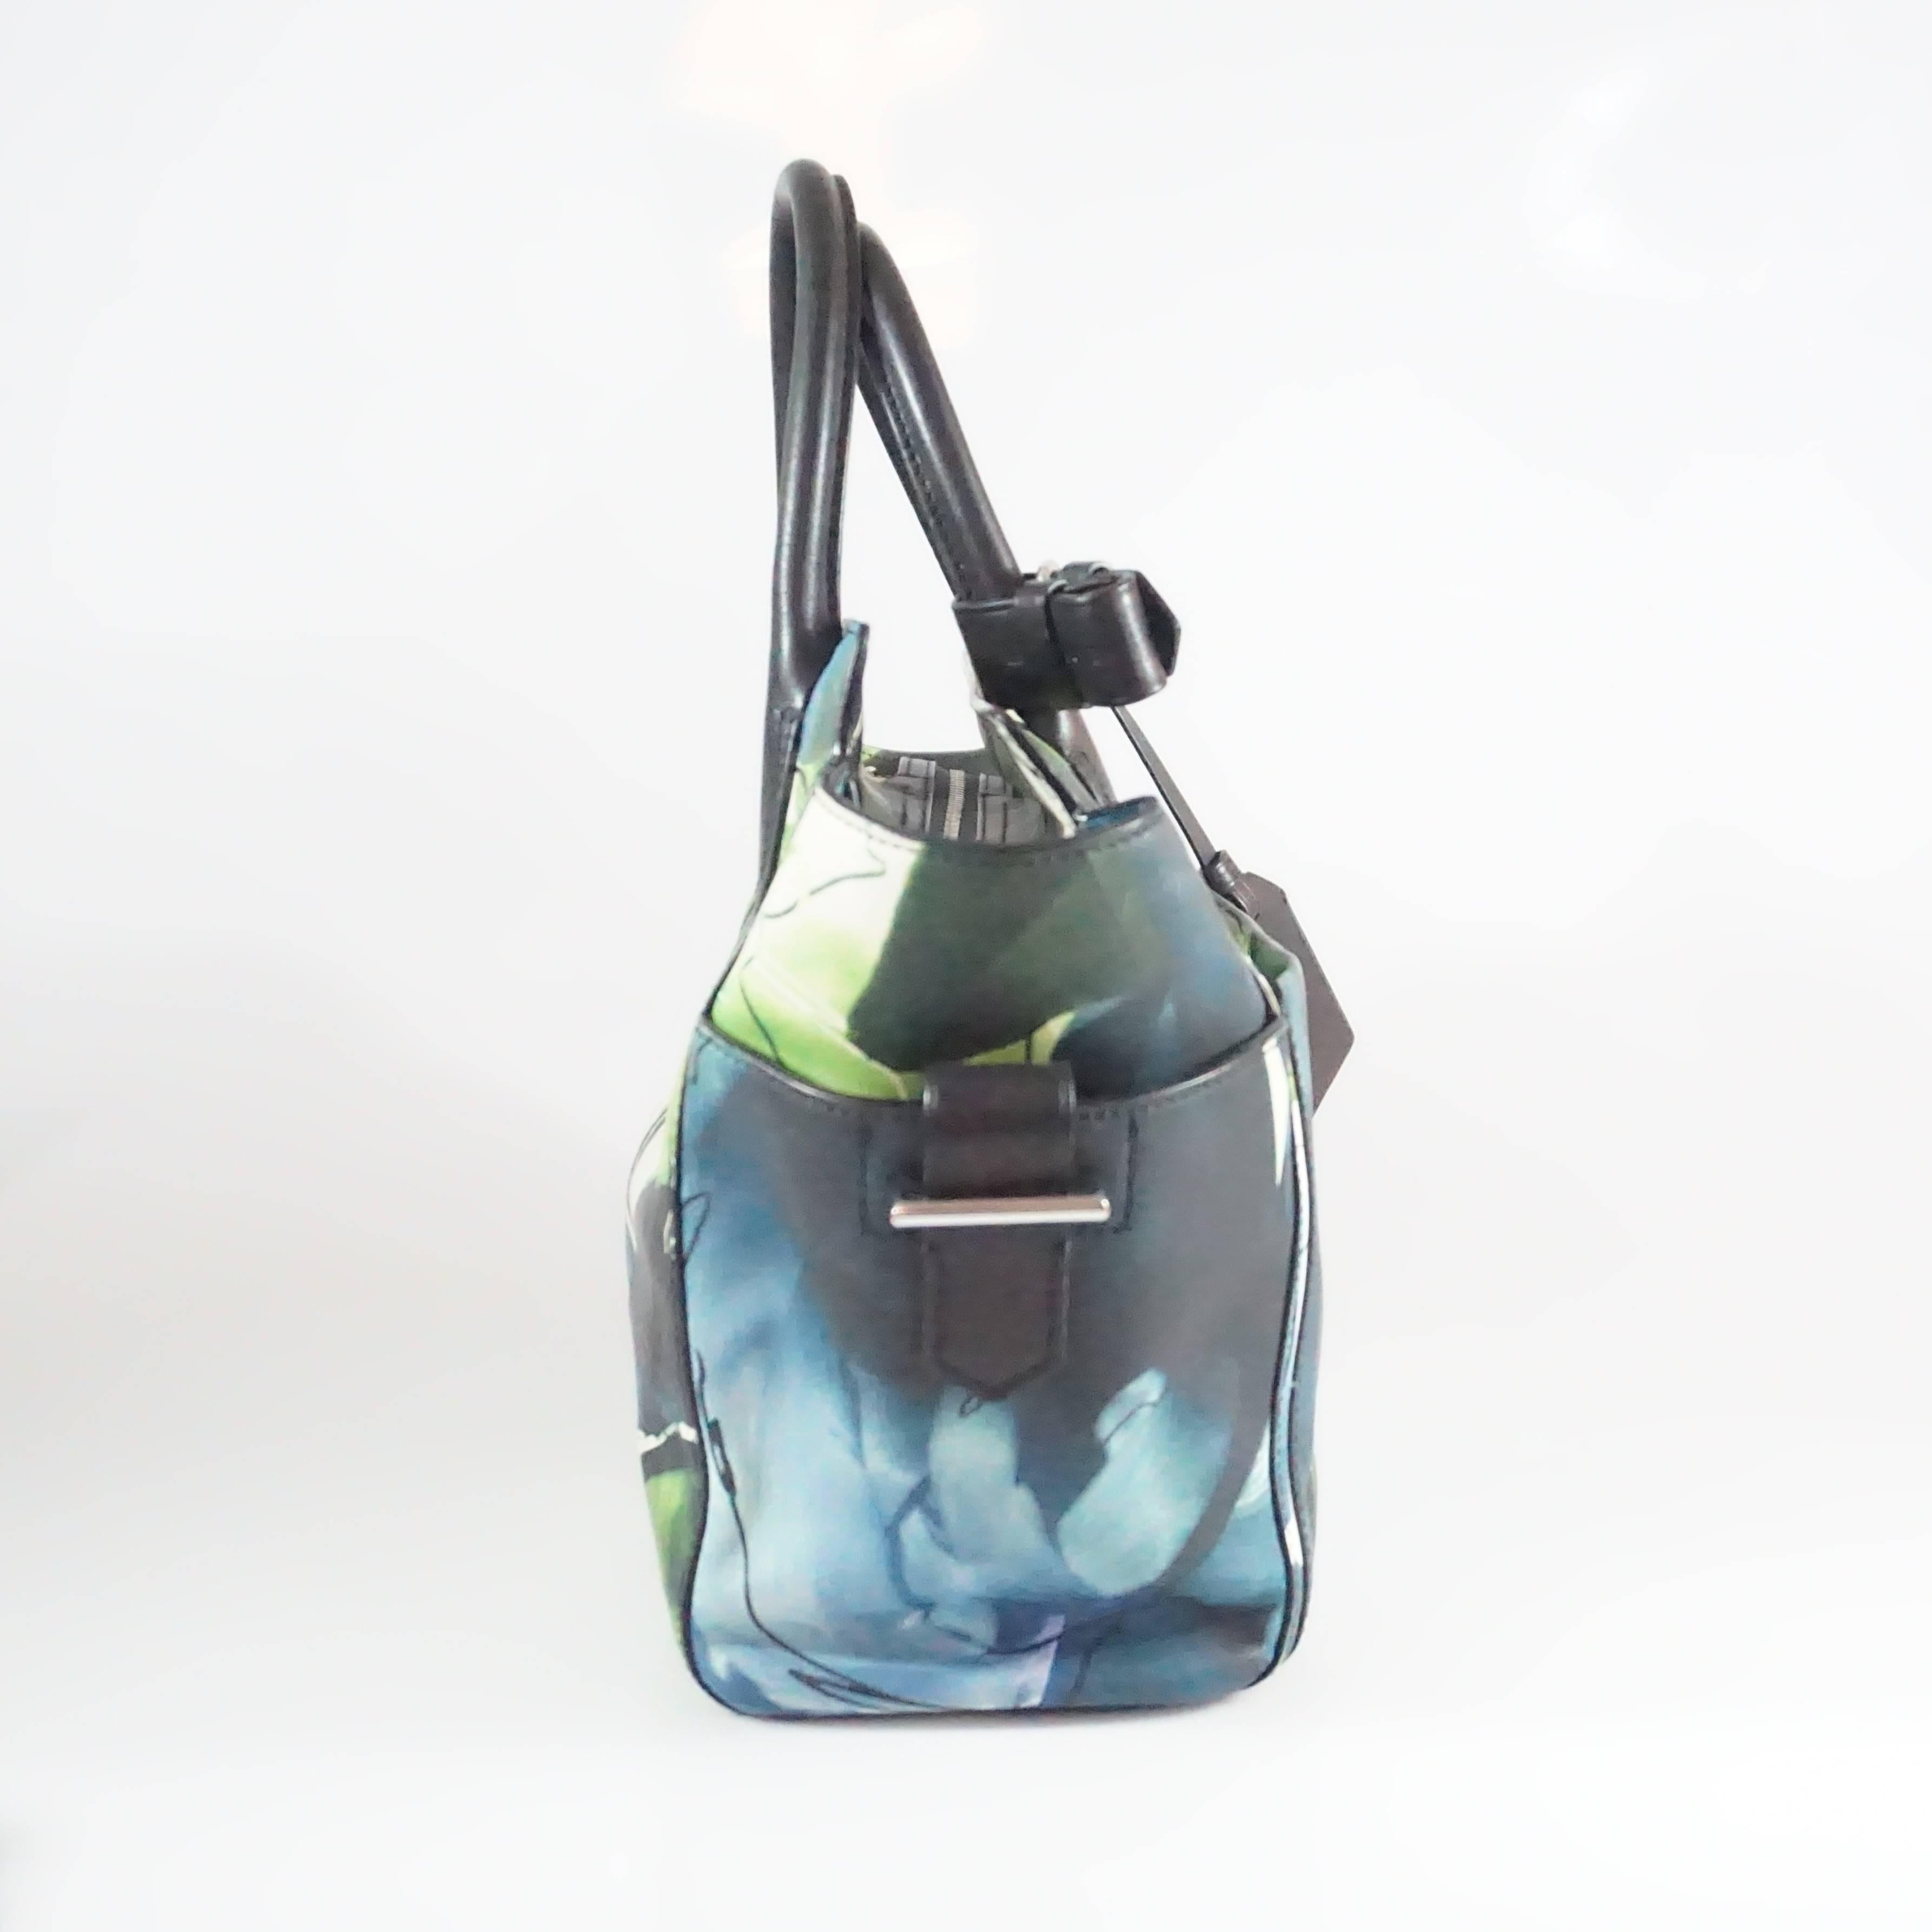 This Reed Krakoff leather mini tote has a print with hues of blue, green, black, and white. The bag features side flaps, 3 outer pockets, a zip closure, and 1 interior zip pocket. The bag is in fair condition with some wear to the leather as